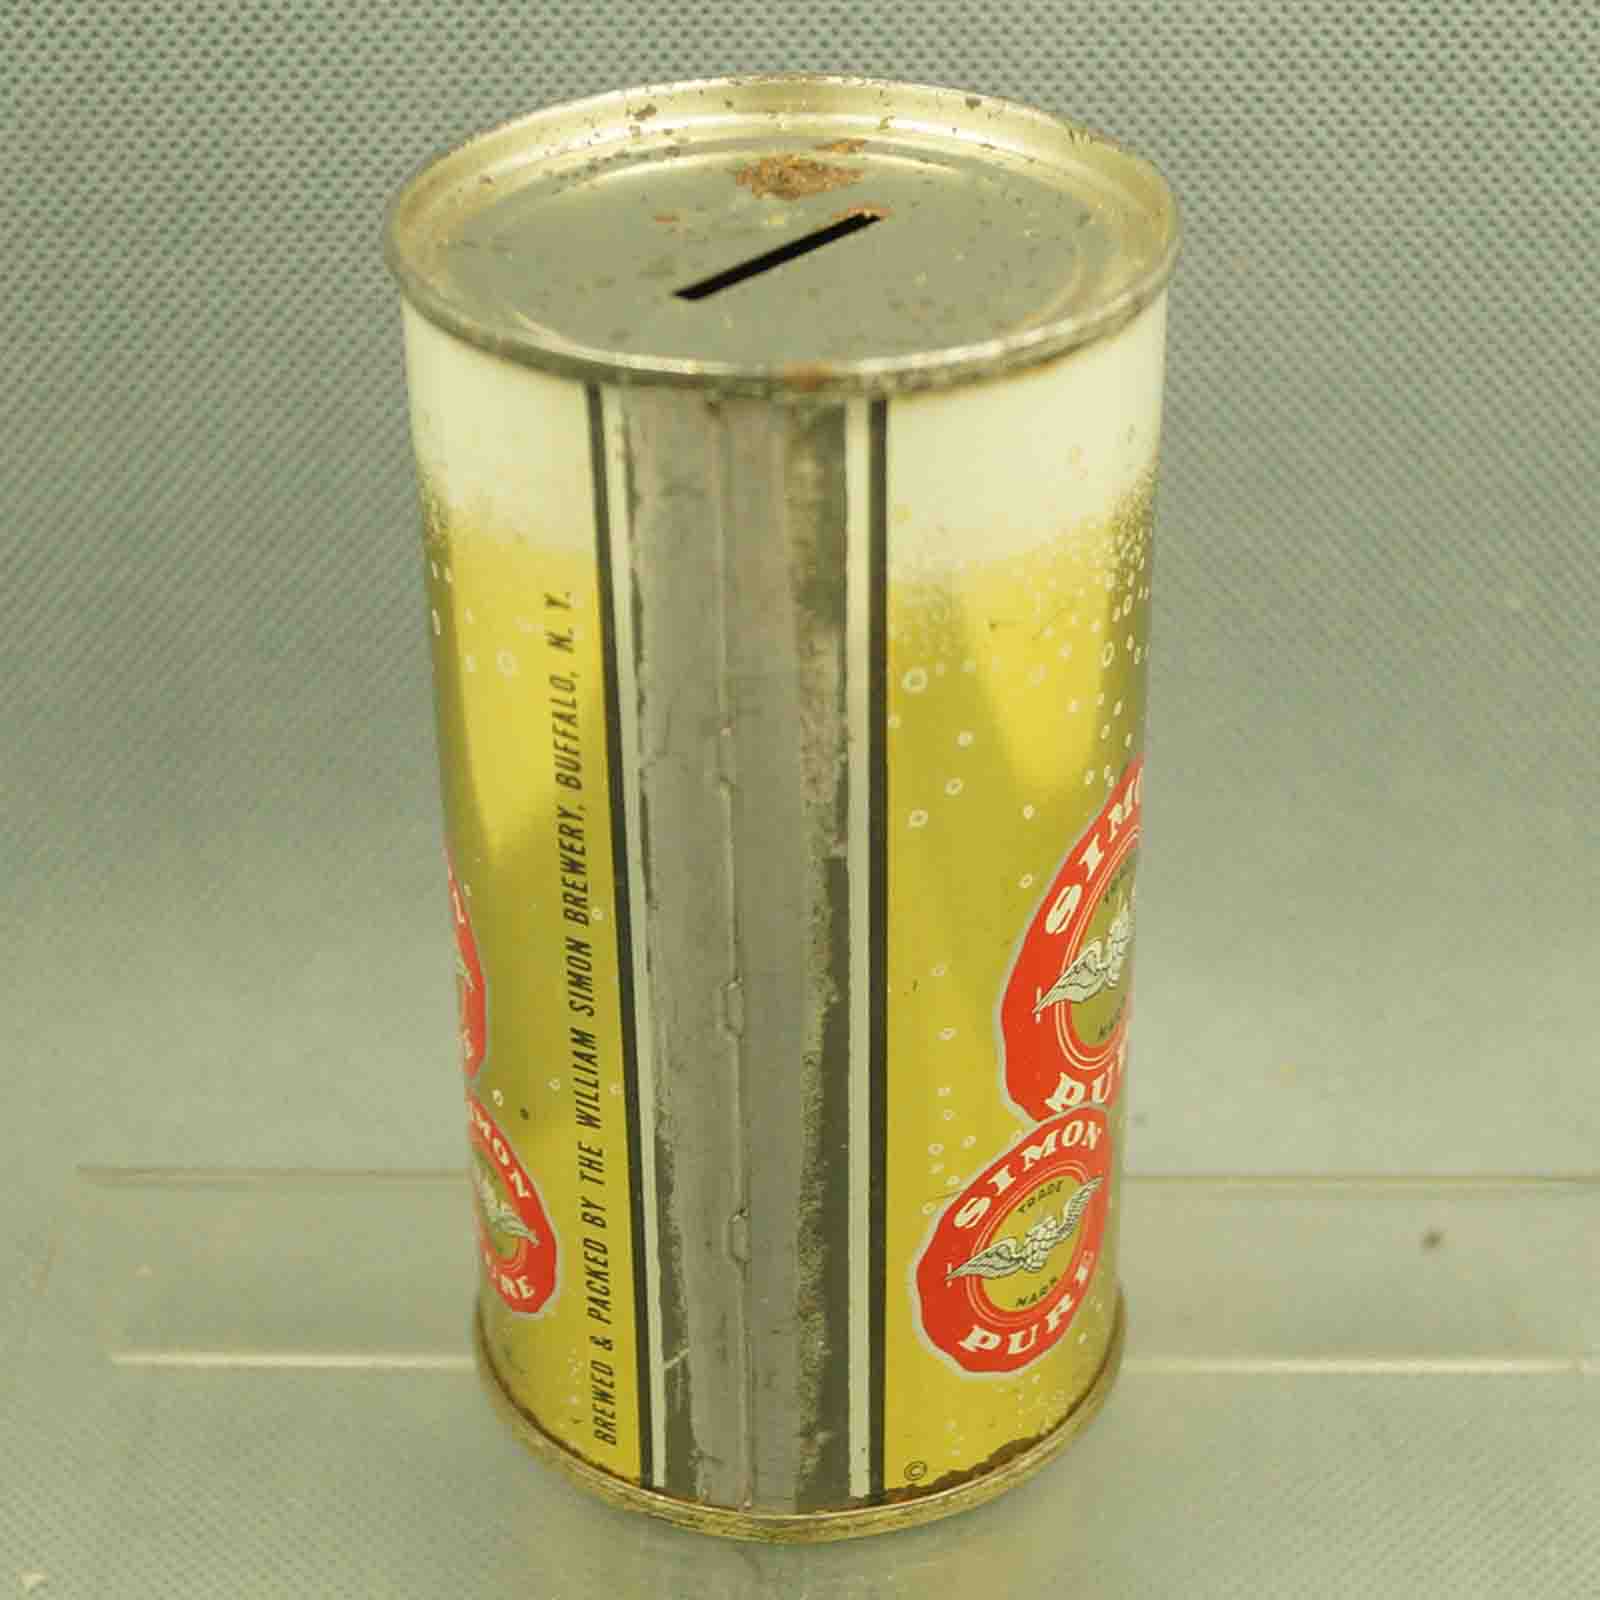 simon 134-23 pure flat top beer can 3